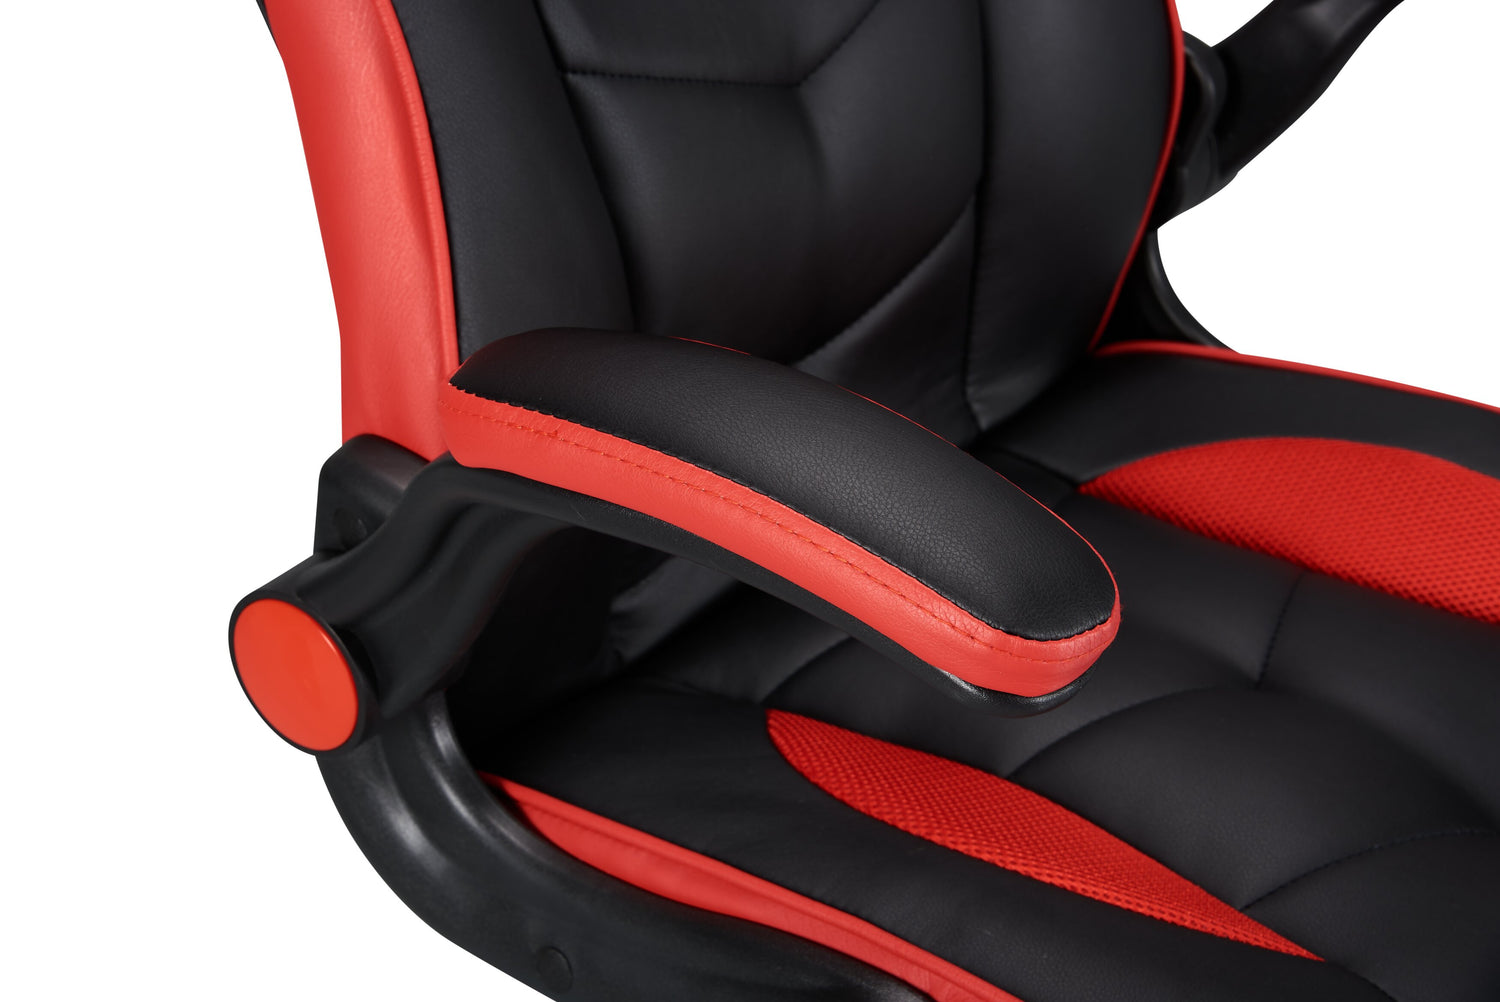 Artemis Gaming Chair - Red and Black